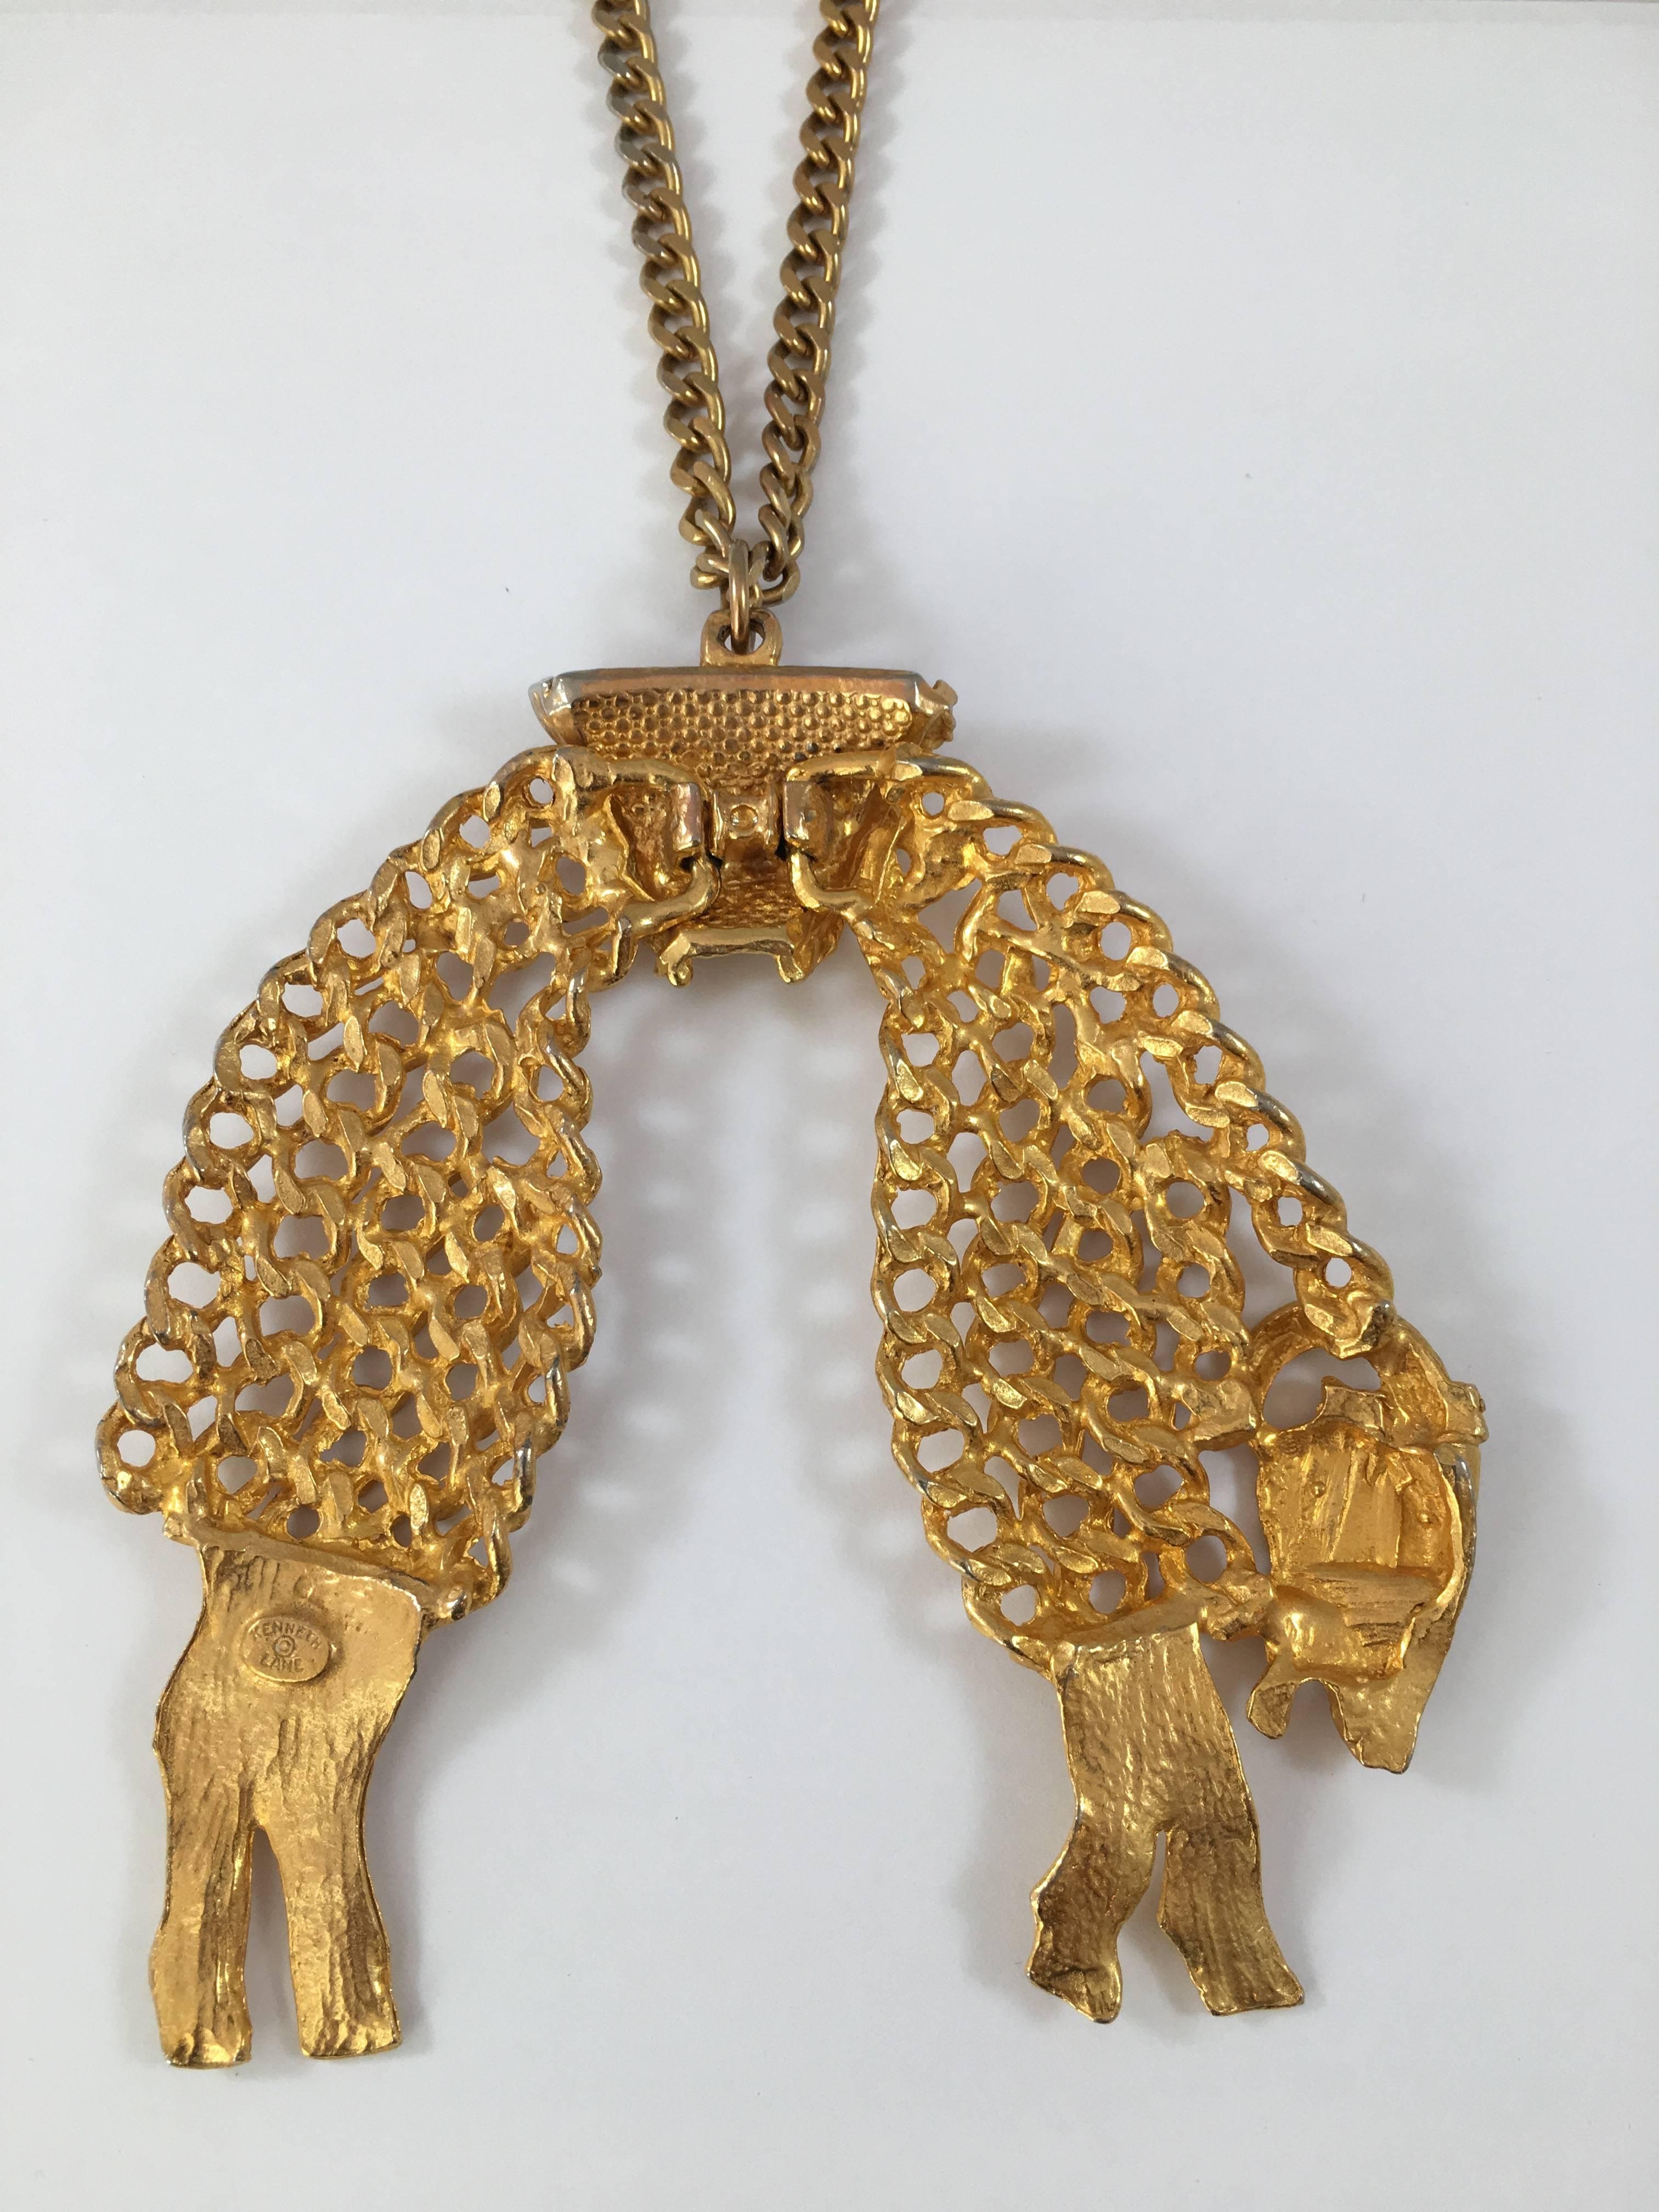 1970s Huge Kenneth Jay Lane Golden Fleece Sheep Pendant Necklace In Good Condition For Sale In Chicago, IL